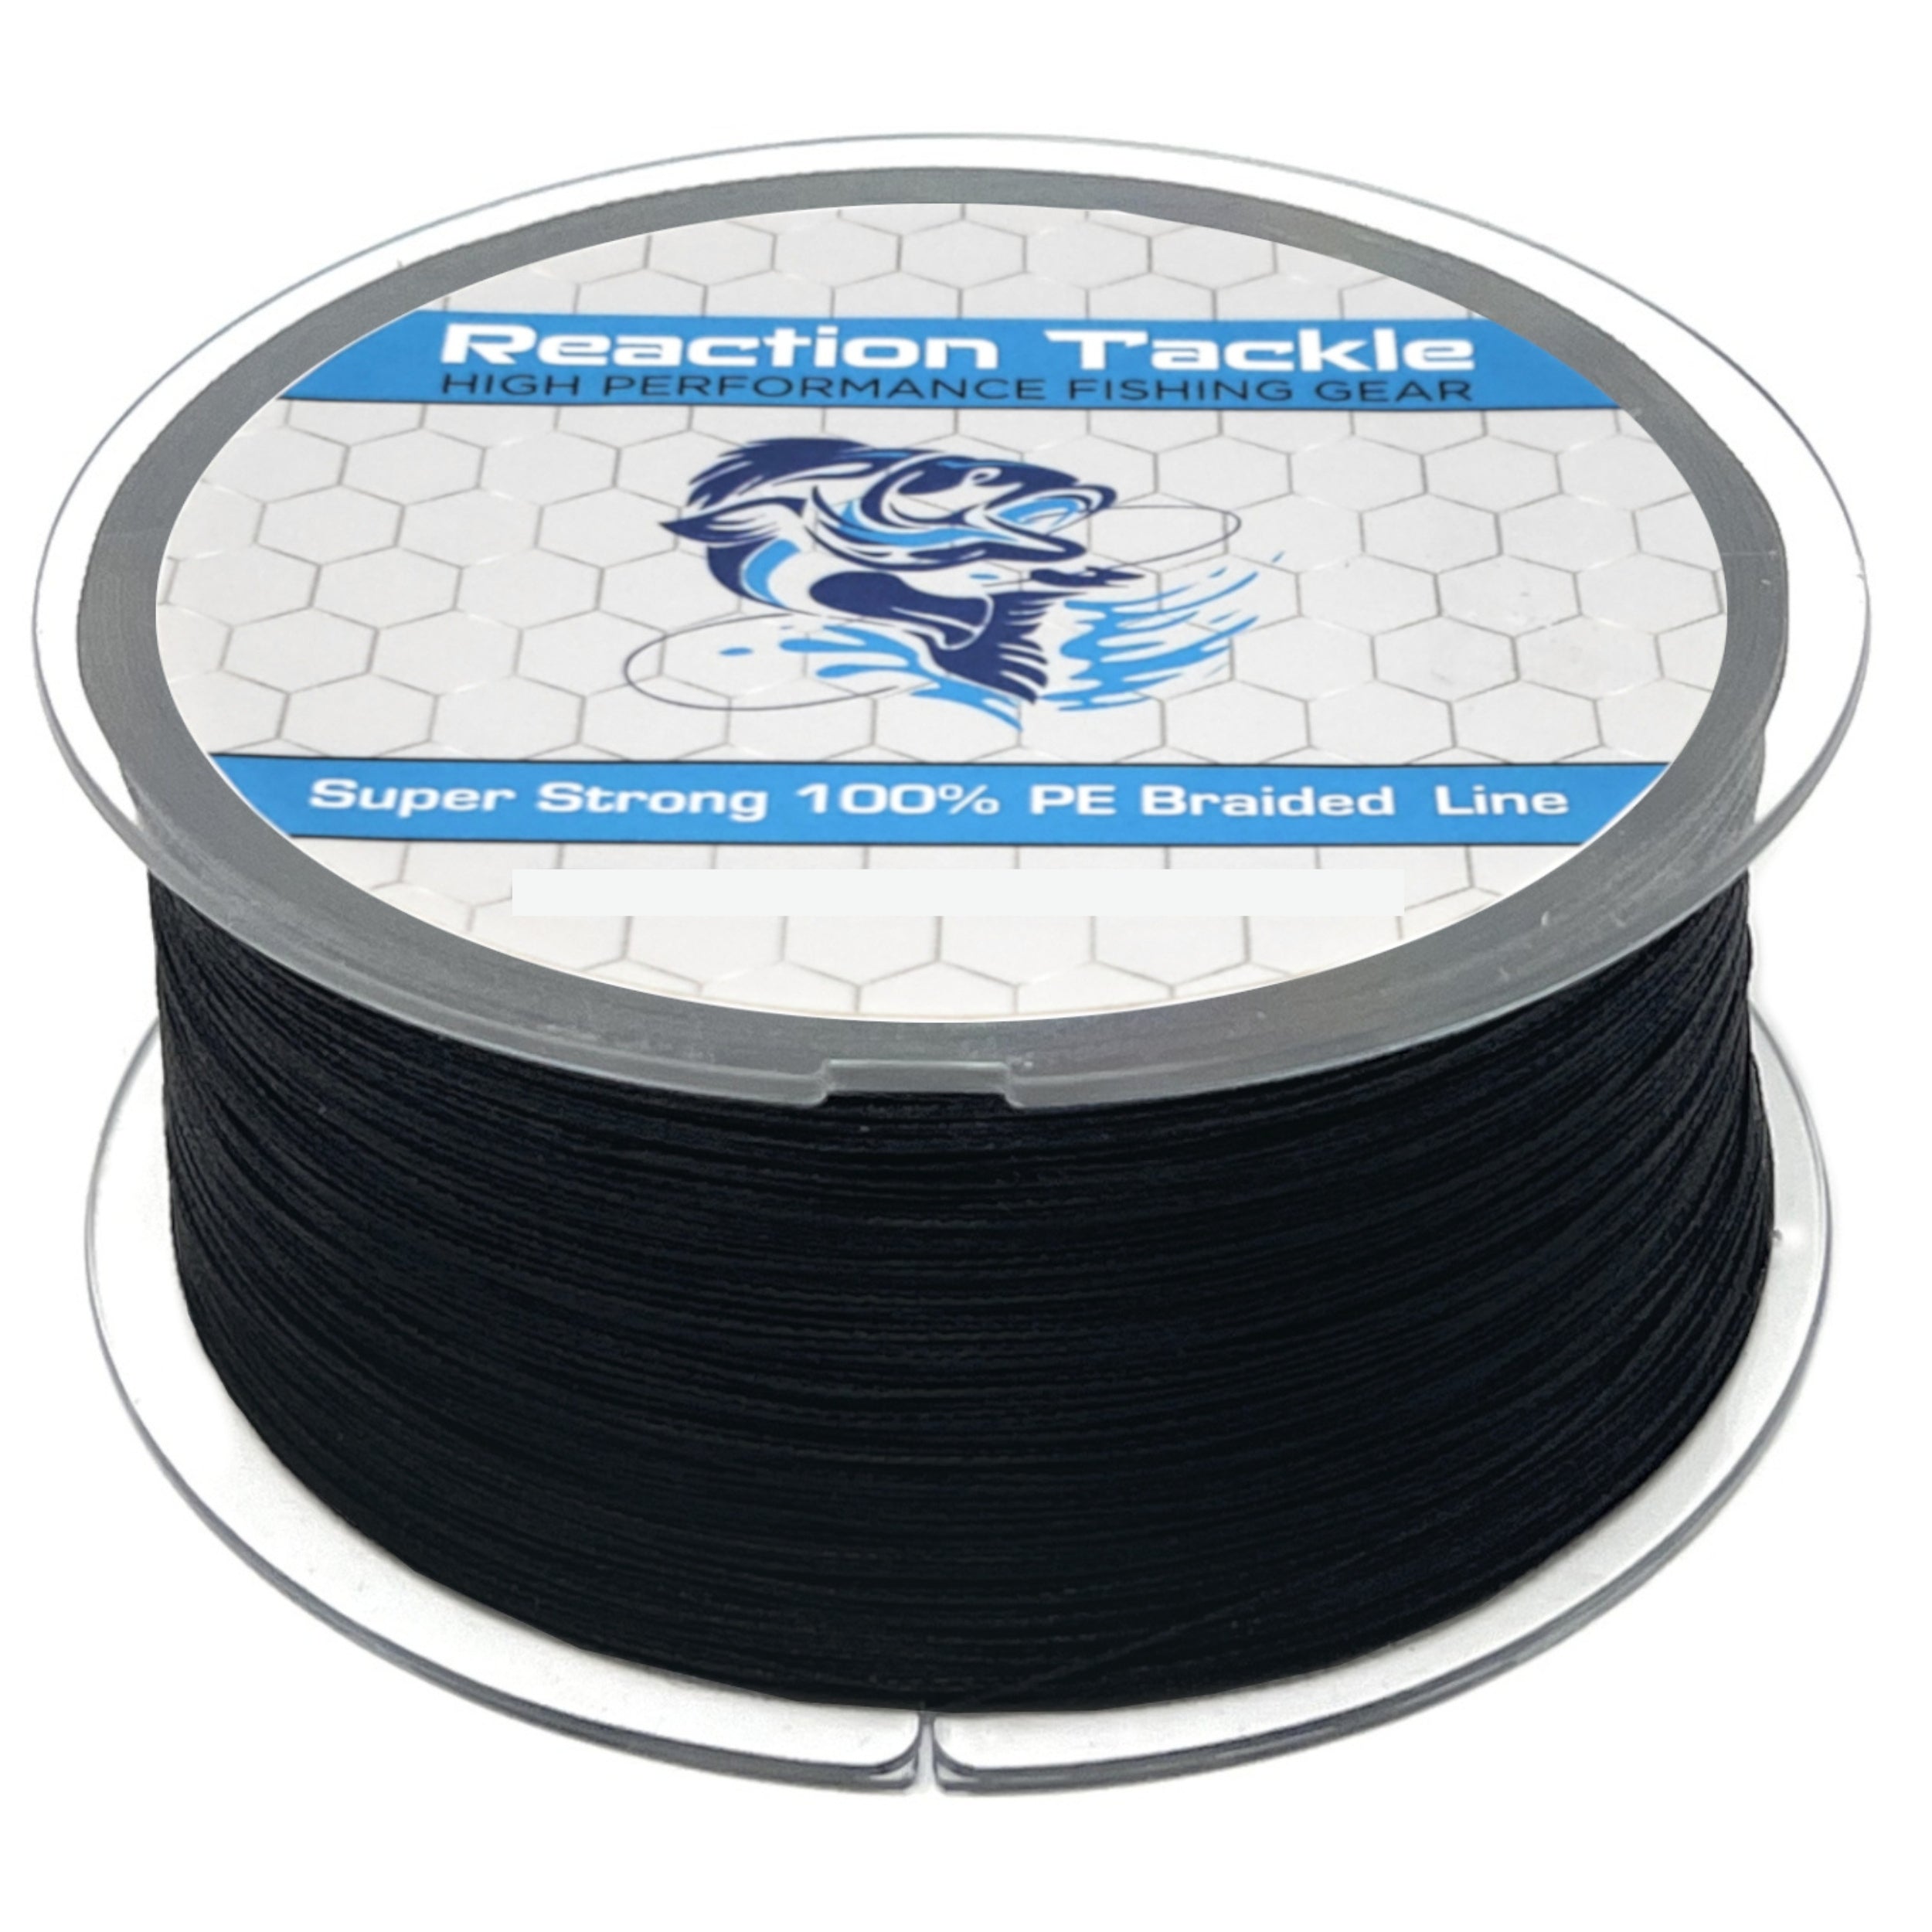 Reaction Tackle Braided Fishing Line Review 